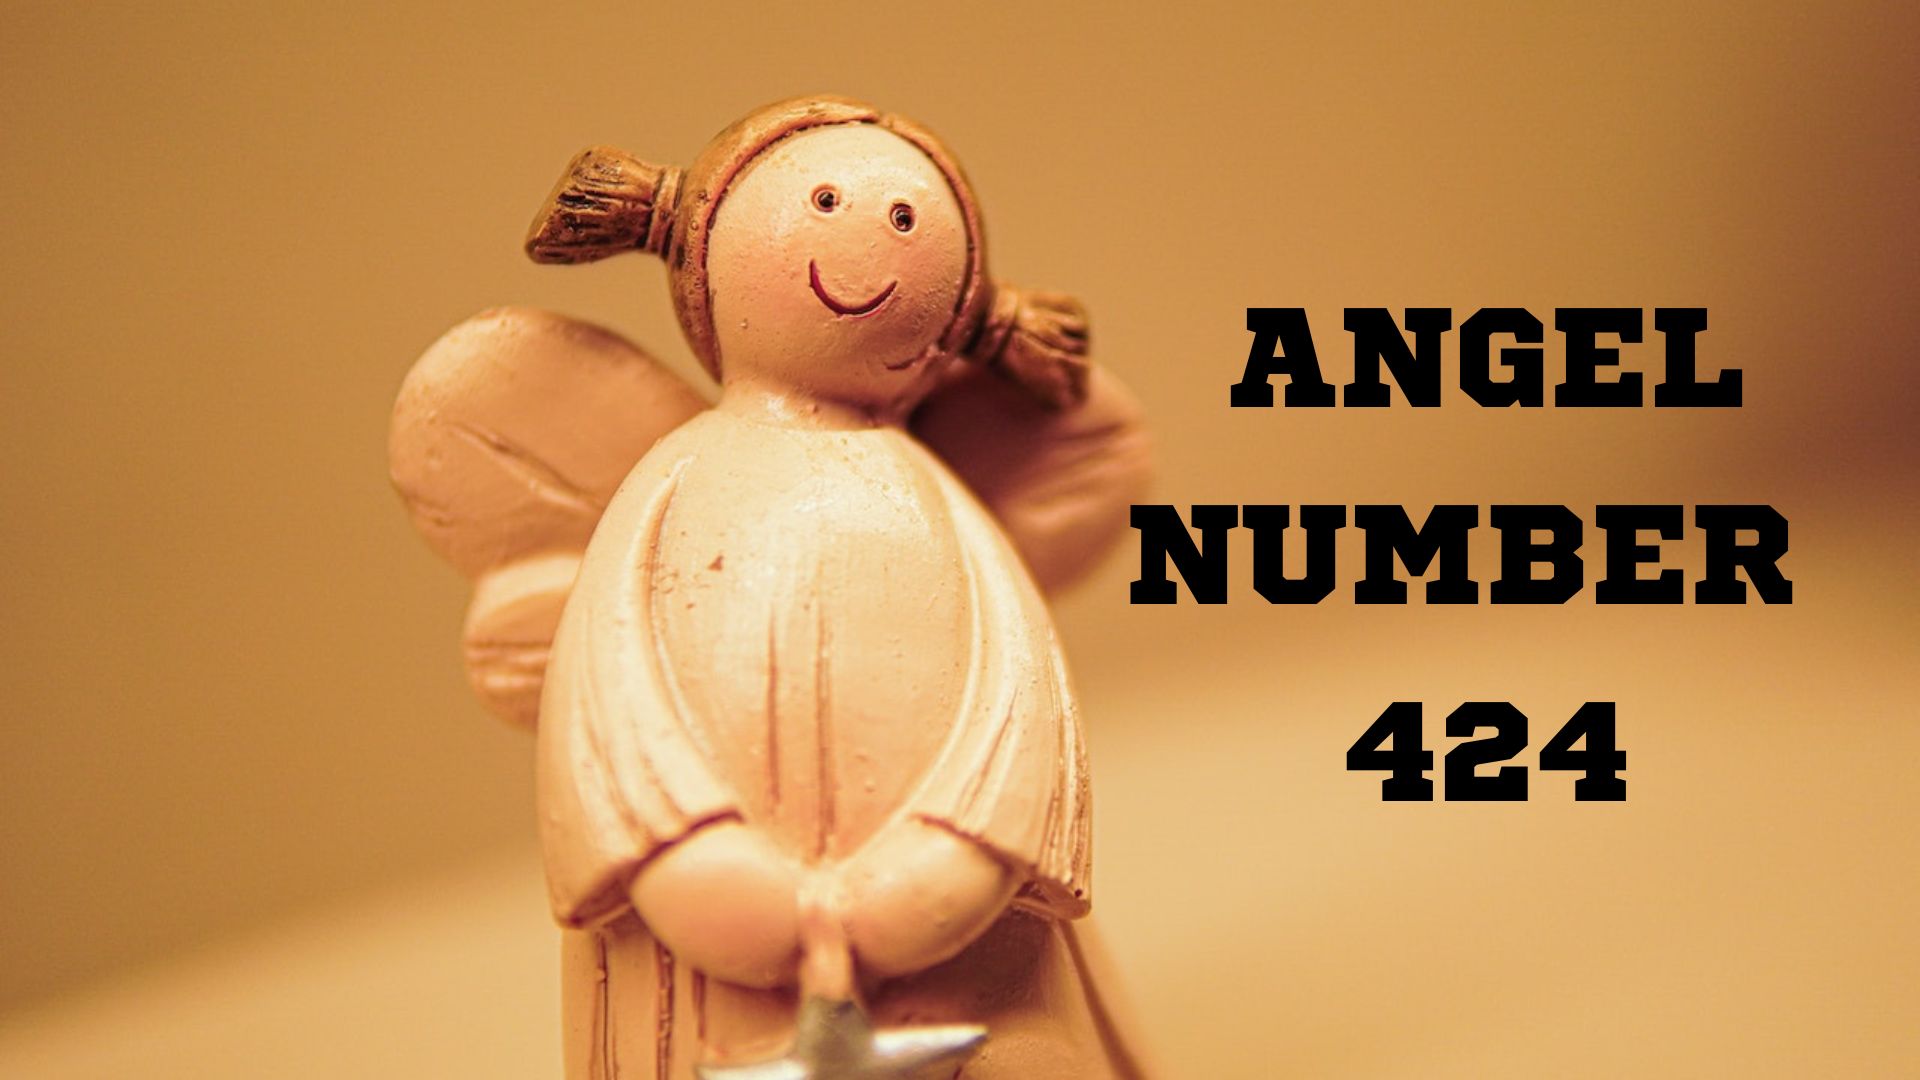 Angel Number 424 - A Symbol Of Immense Love And Unbreakable Bonds